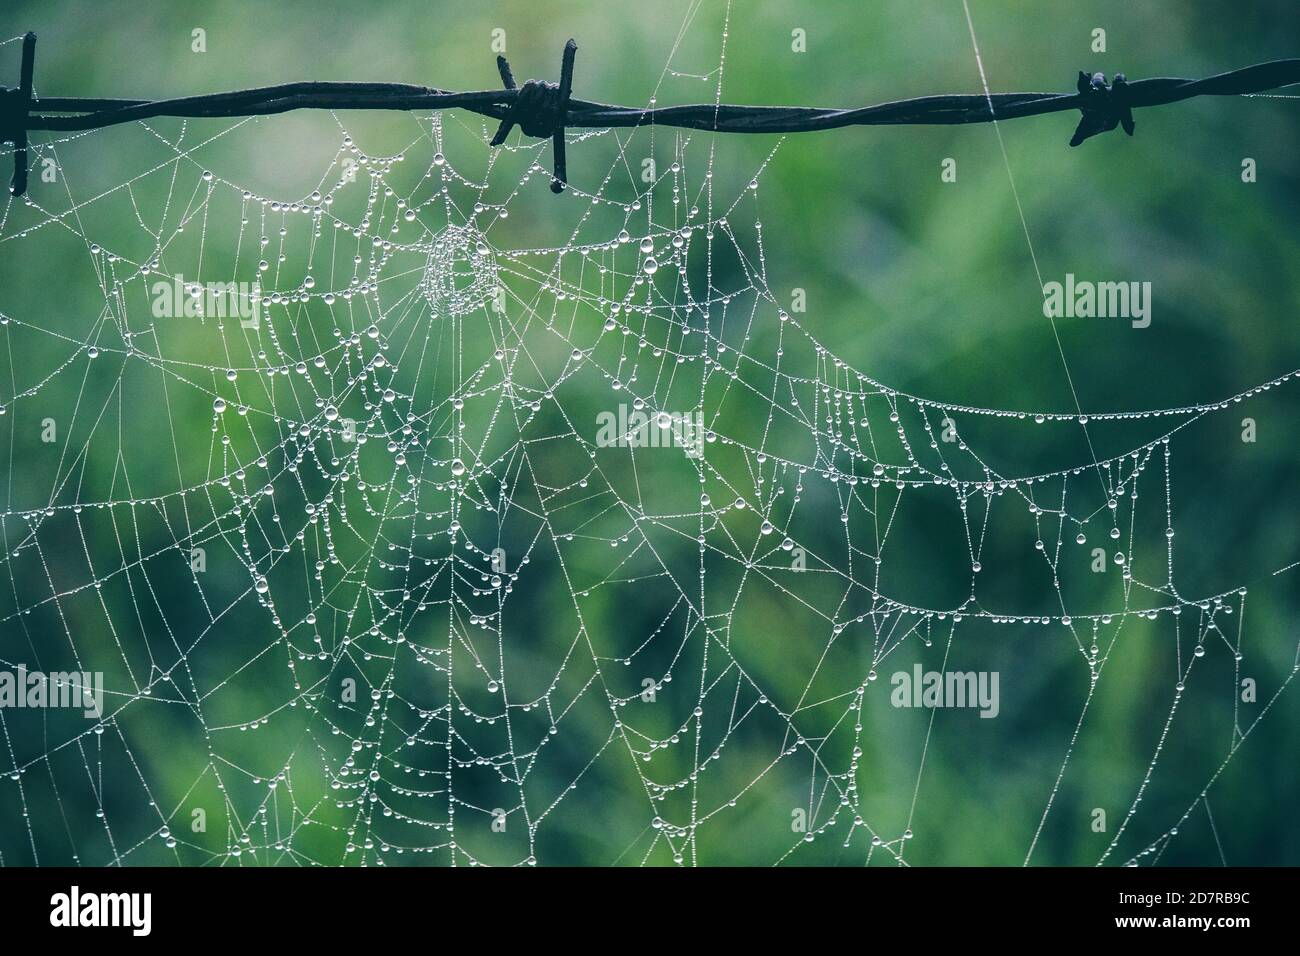 Spider web hanging on a barded wire after the rain in the jungle. Stock Photo